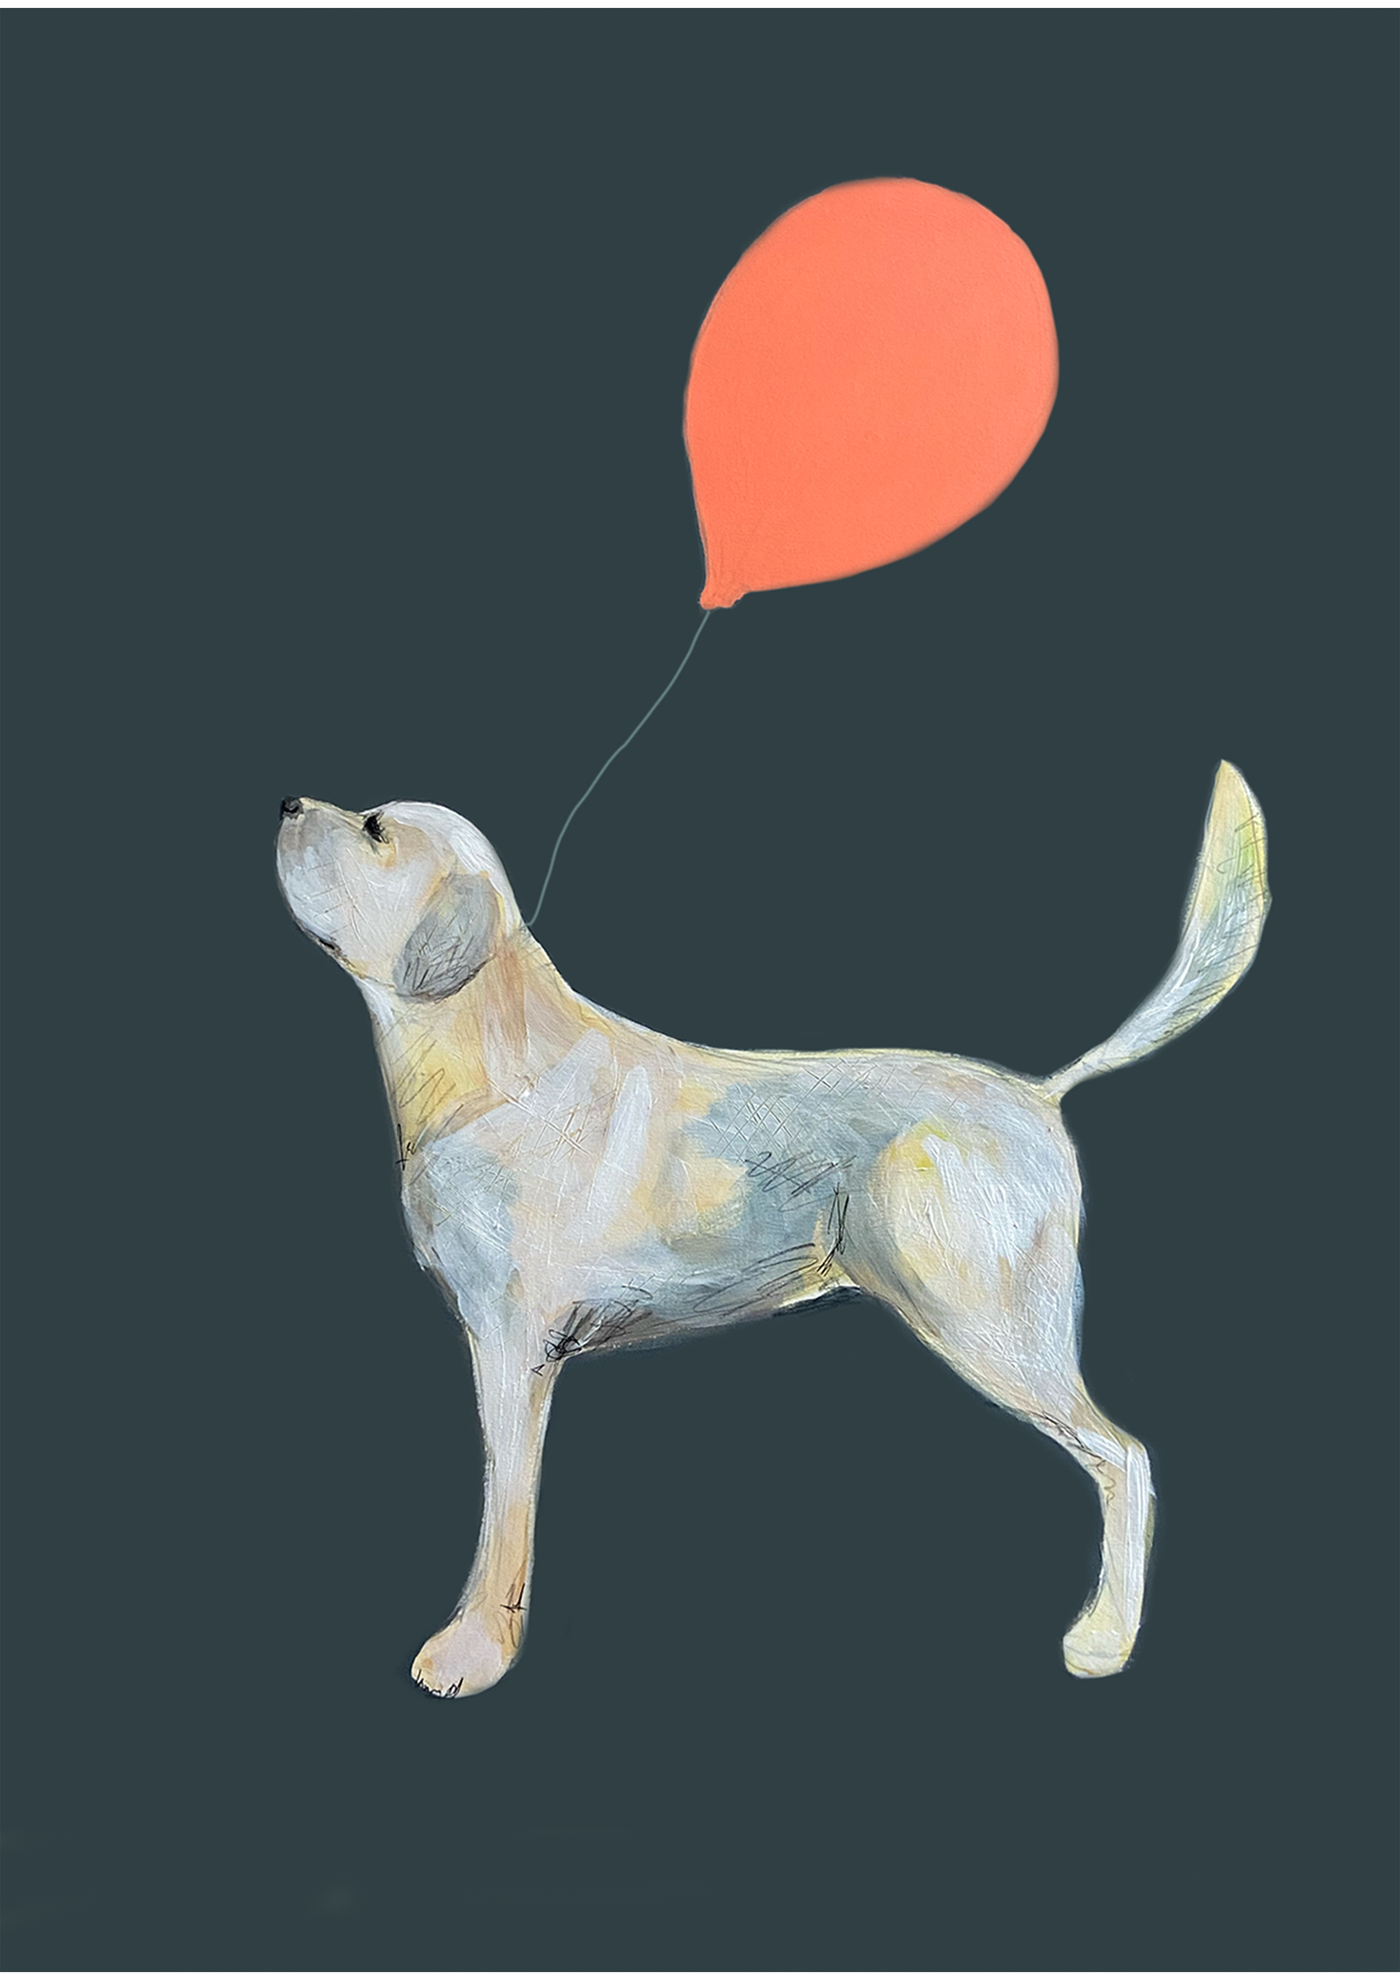 Asa with a red balloon print